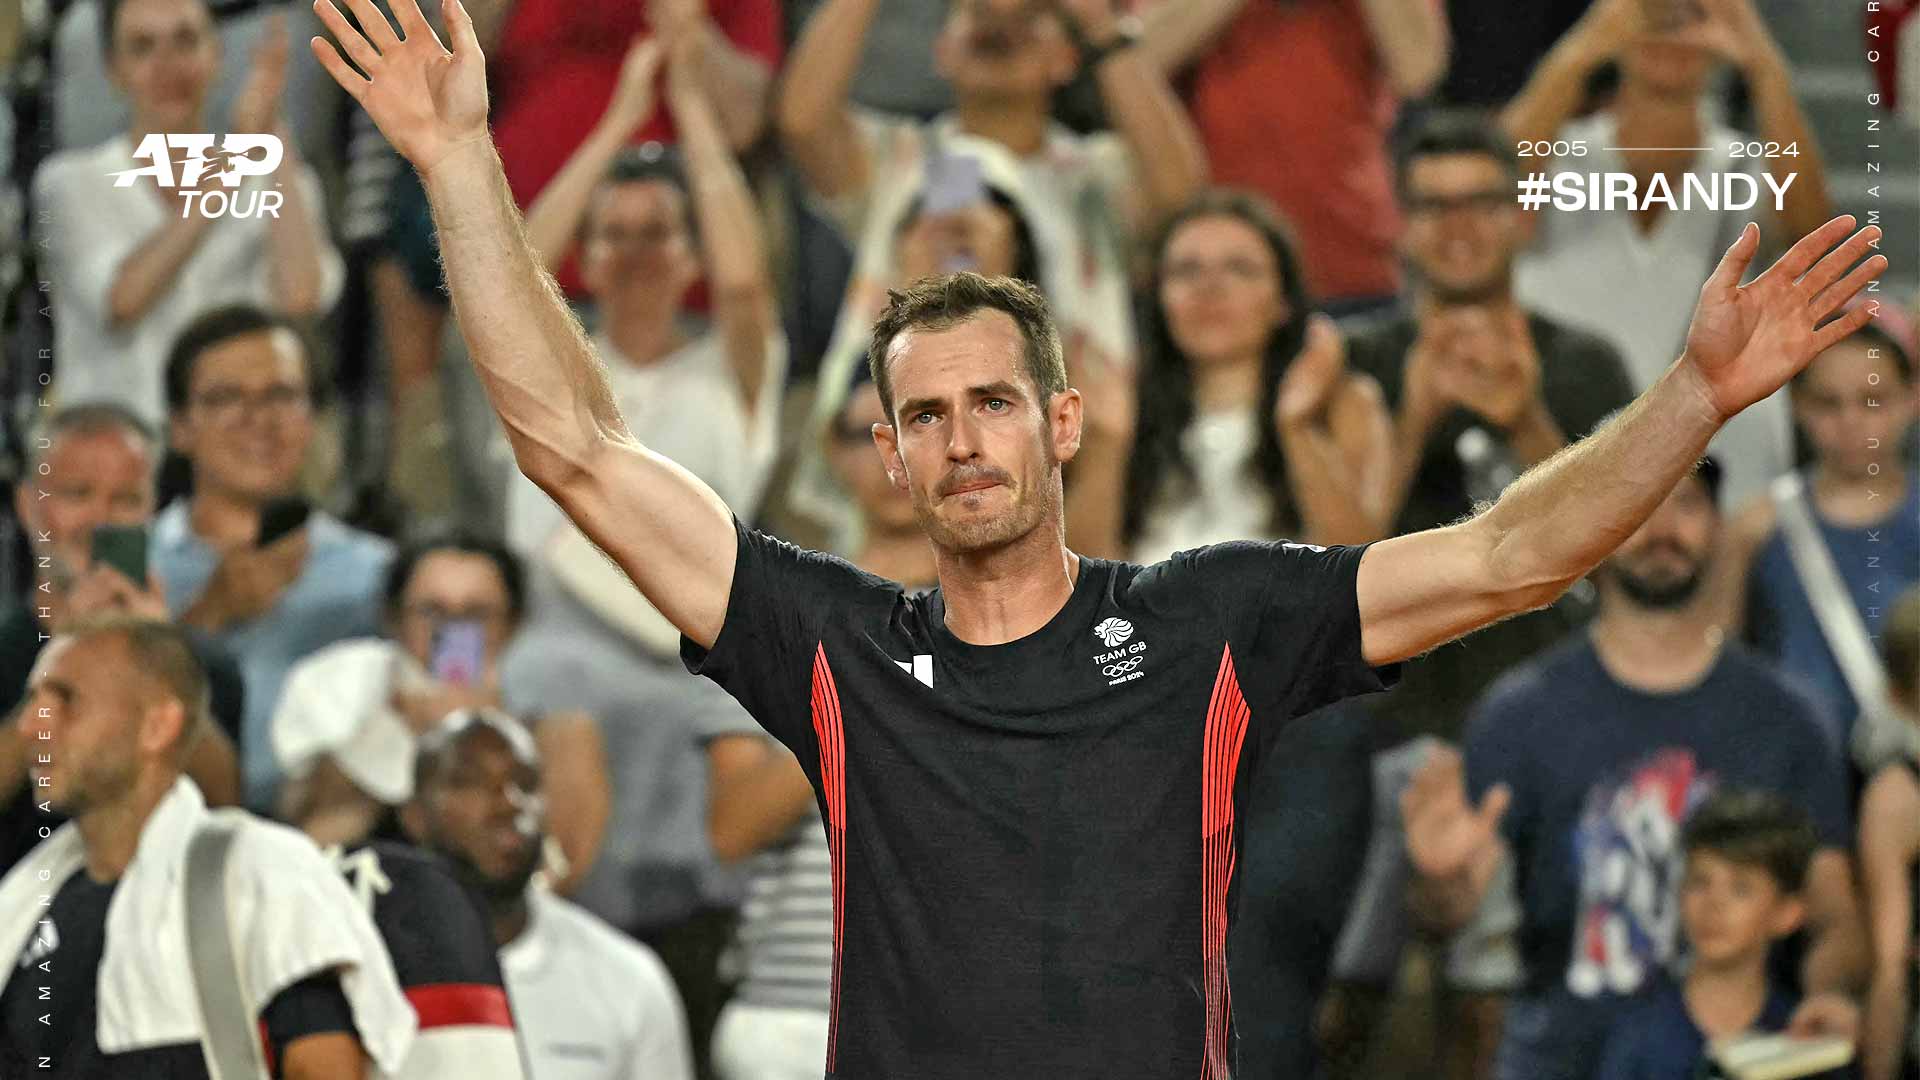 Andy Murray retires after history-making career